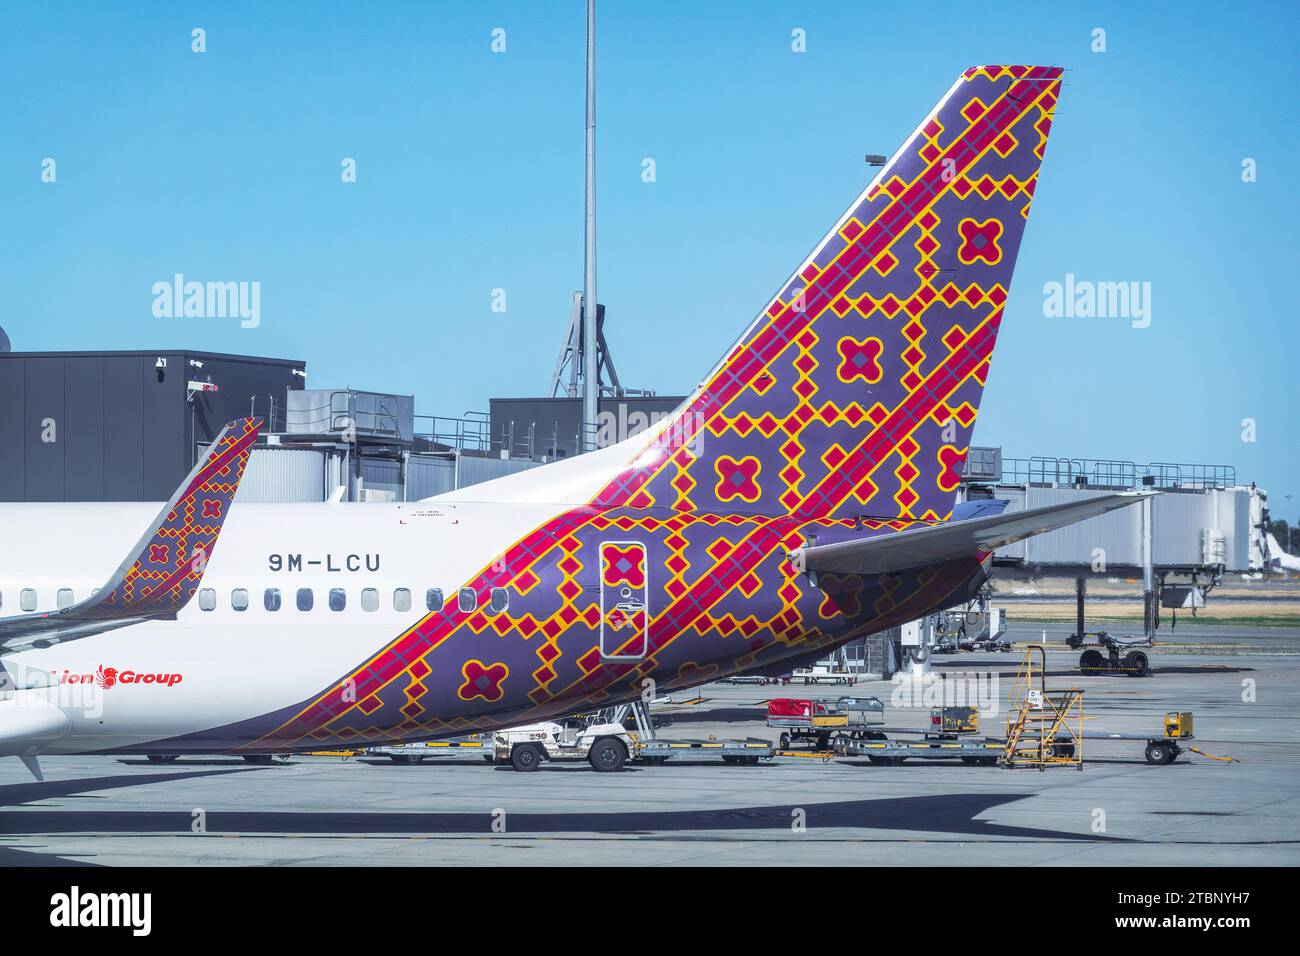 Details of the tail of a Boeing 737-8U3(WL) from Batik Malaysia airline at Perth airport, Western Australia, Australia Stock Photo